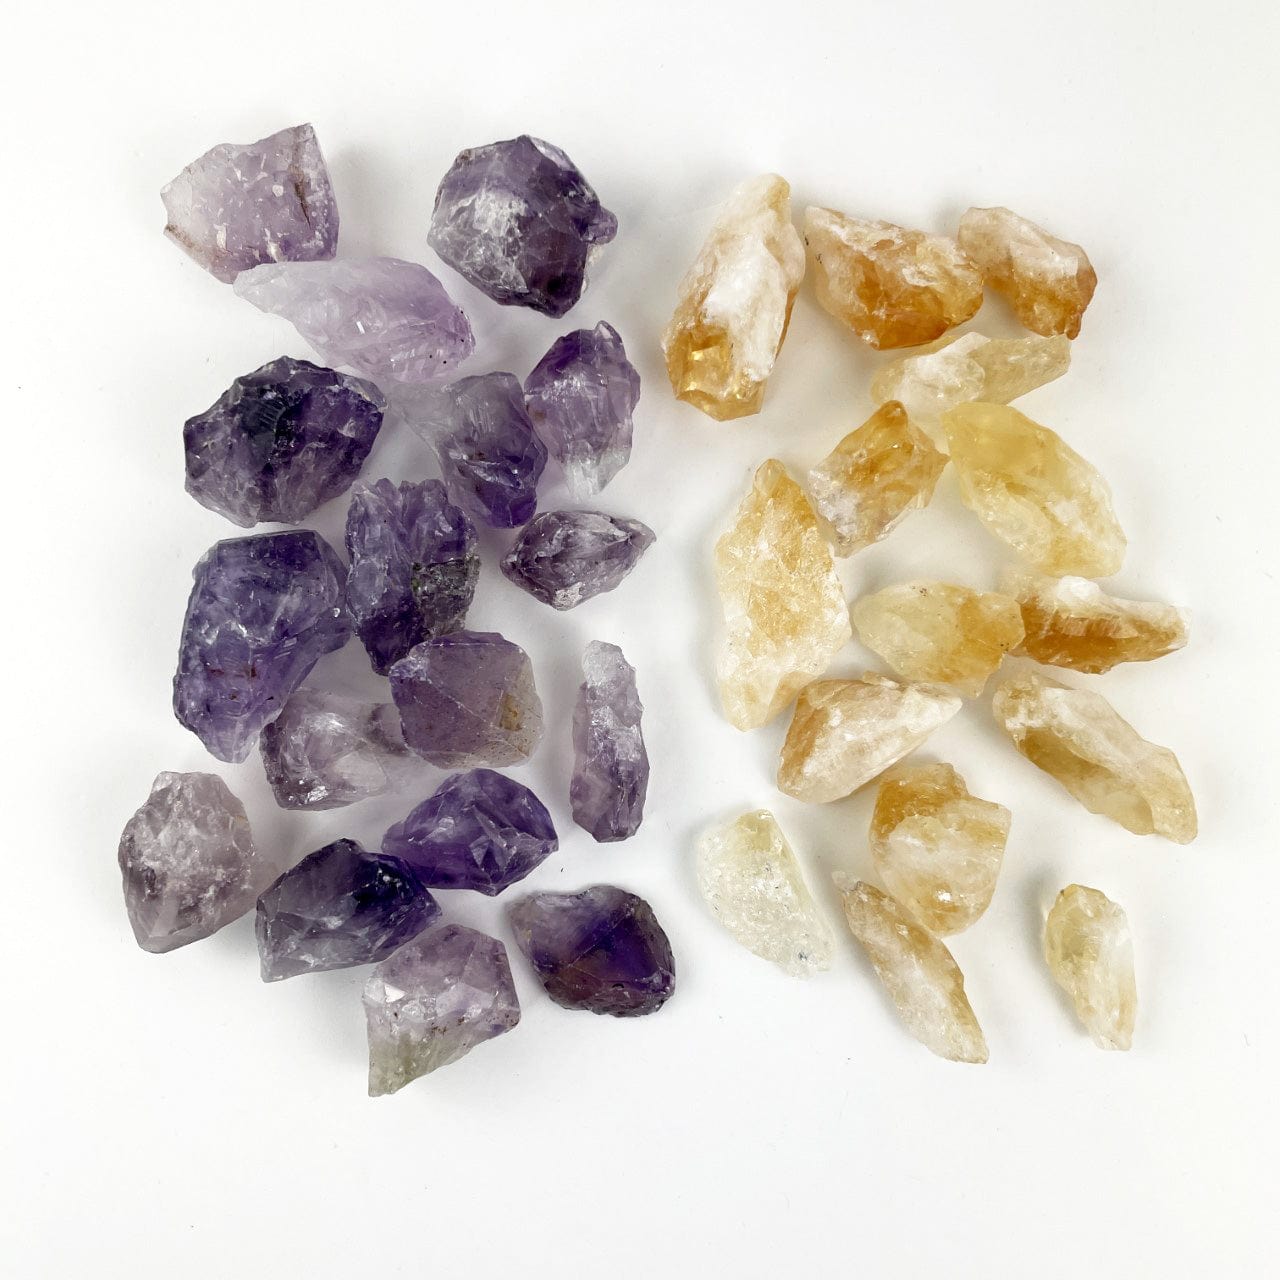 Amethyst and Citrine (Golden Amethyst)  Pieces on a table